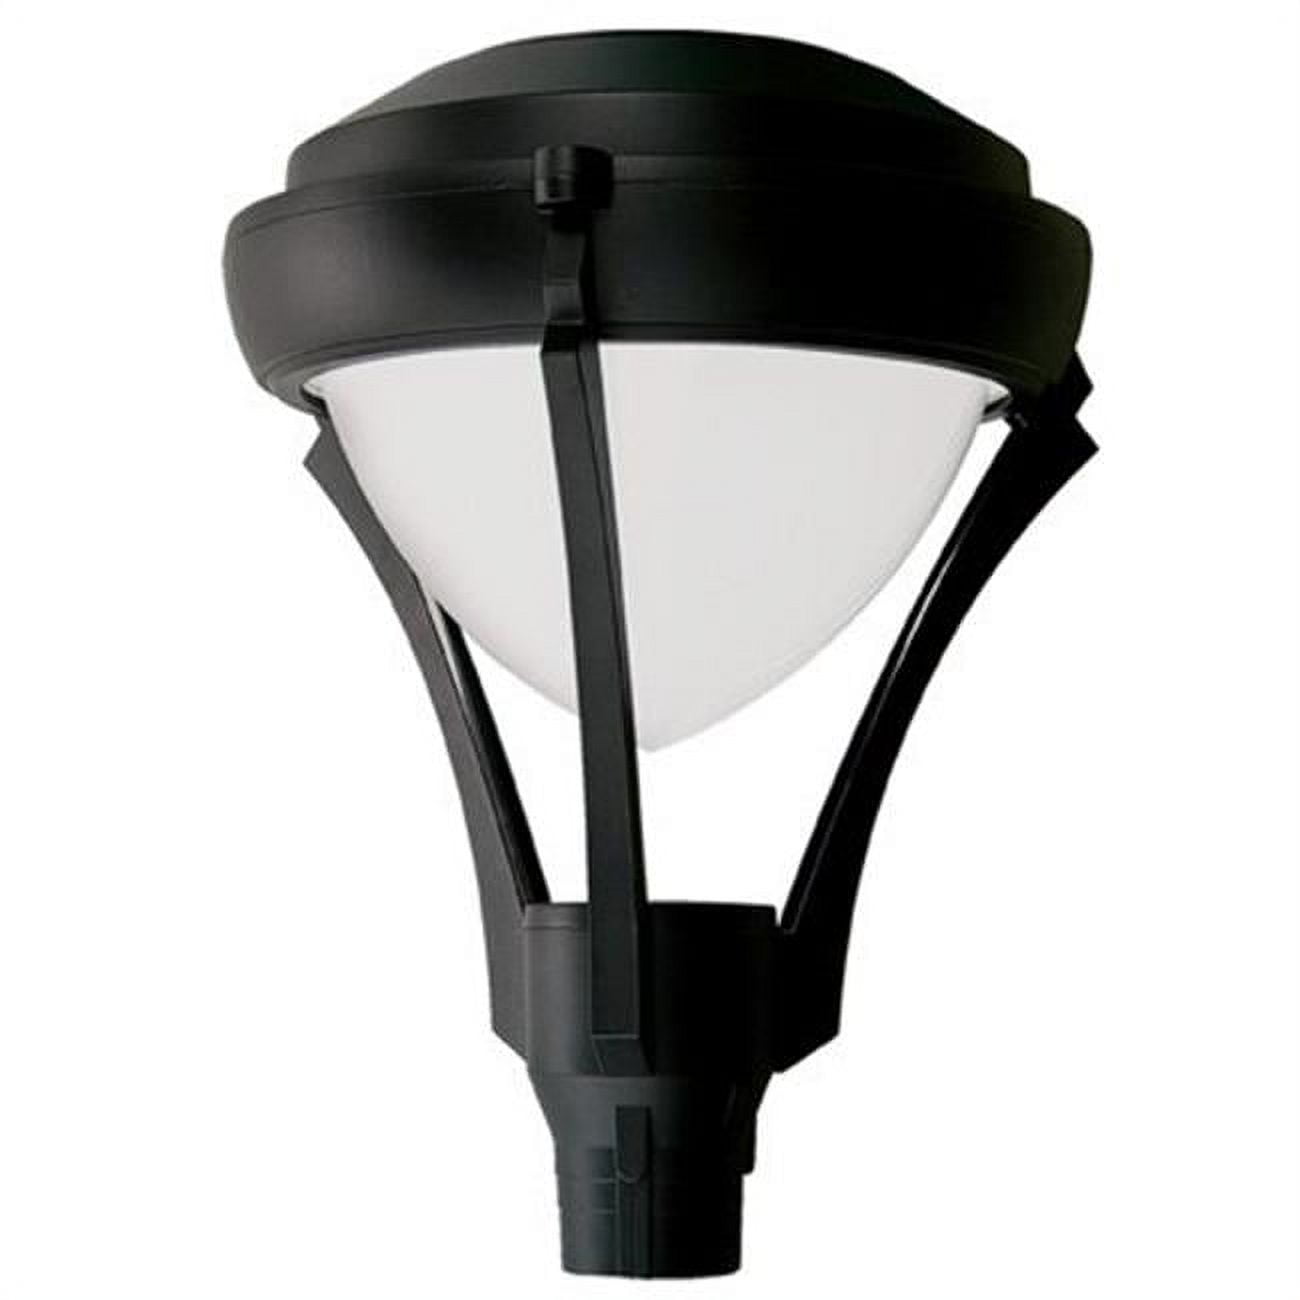 Picture of Dabmar Lighting GM595-B 35W 120V Powder Coated Cast Aluminum Post Top Light Fixture with Metal Halide Lamp, Black - 27.95 x 21.65 x 21.65 in.